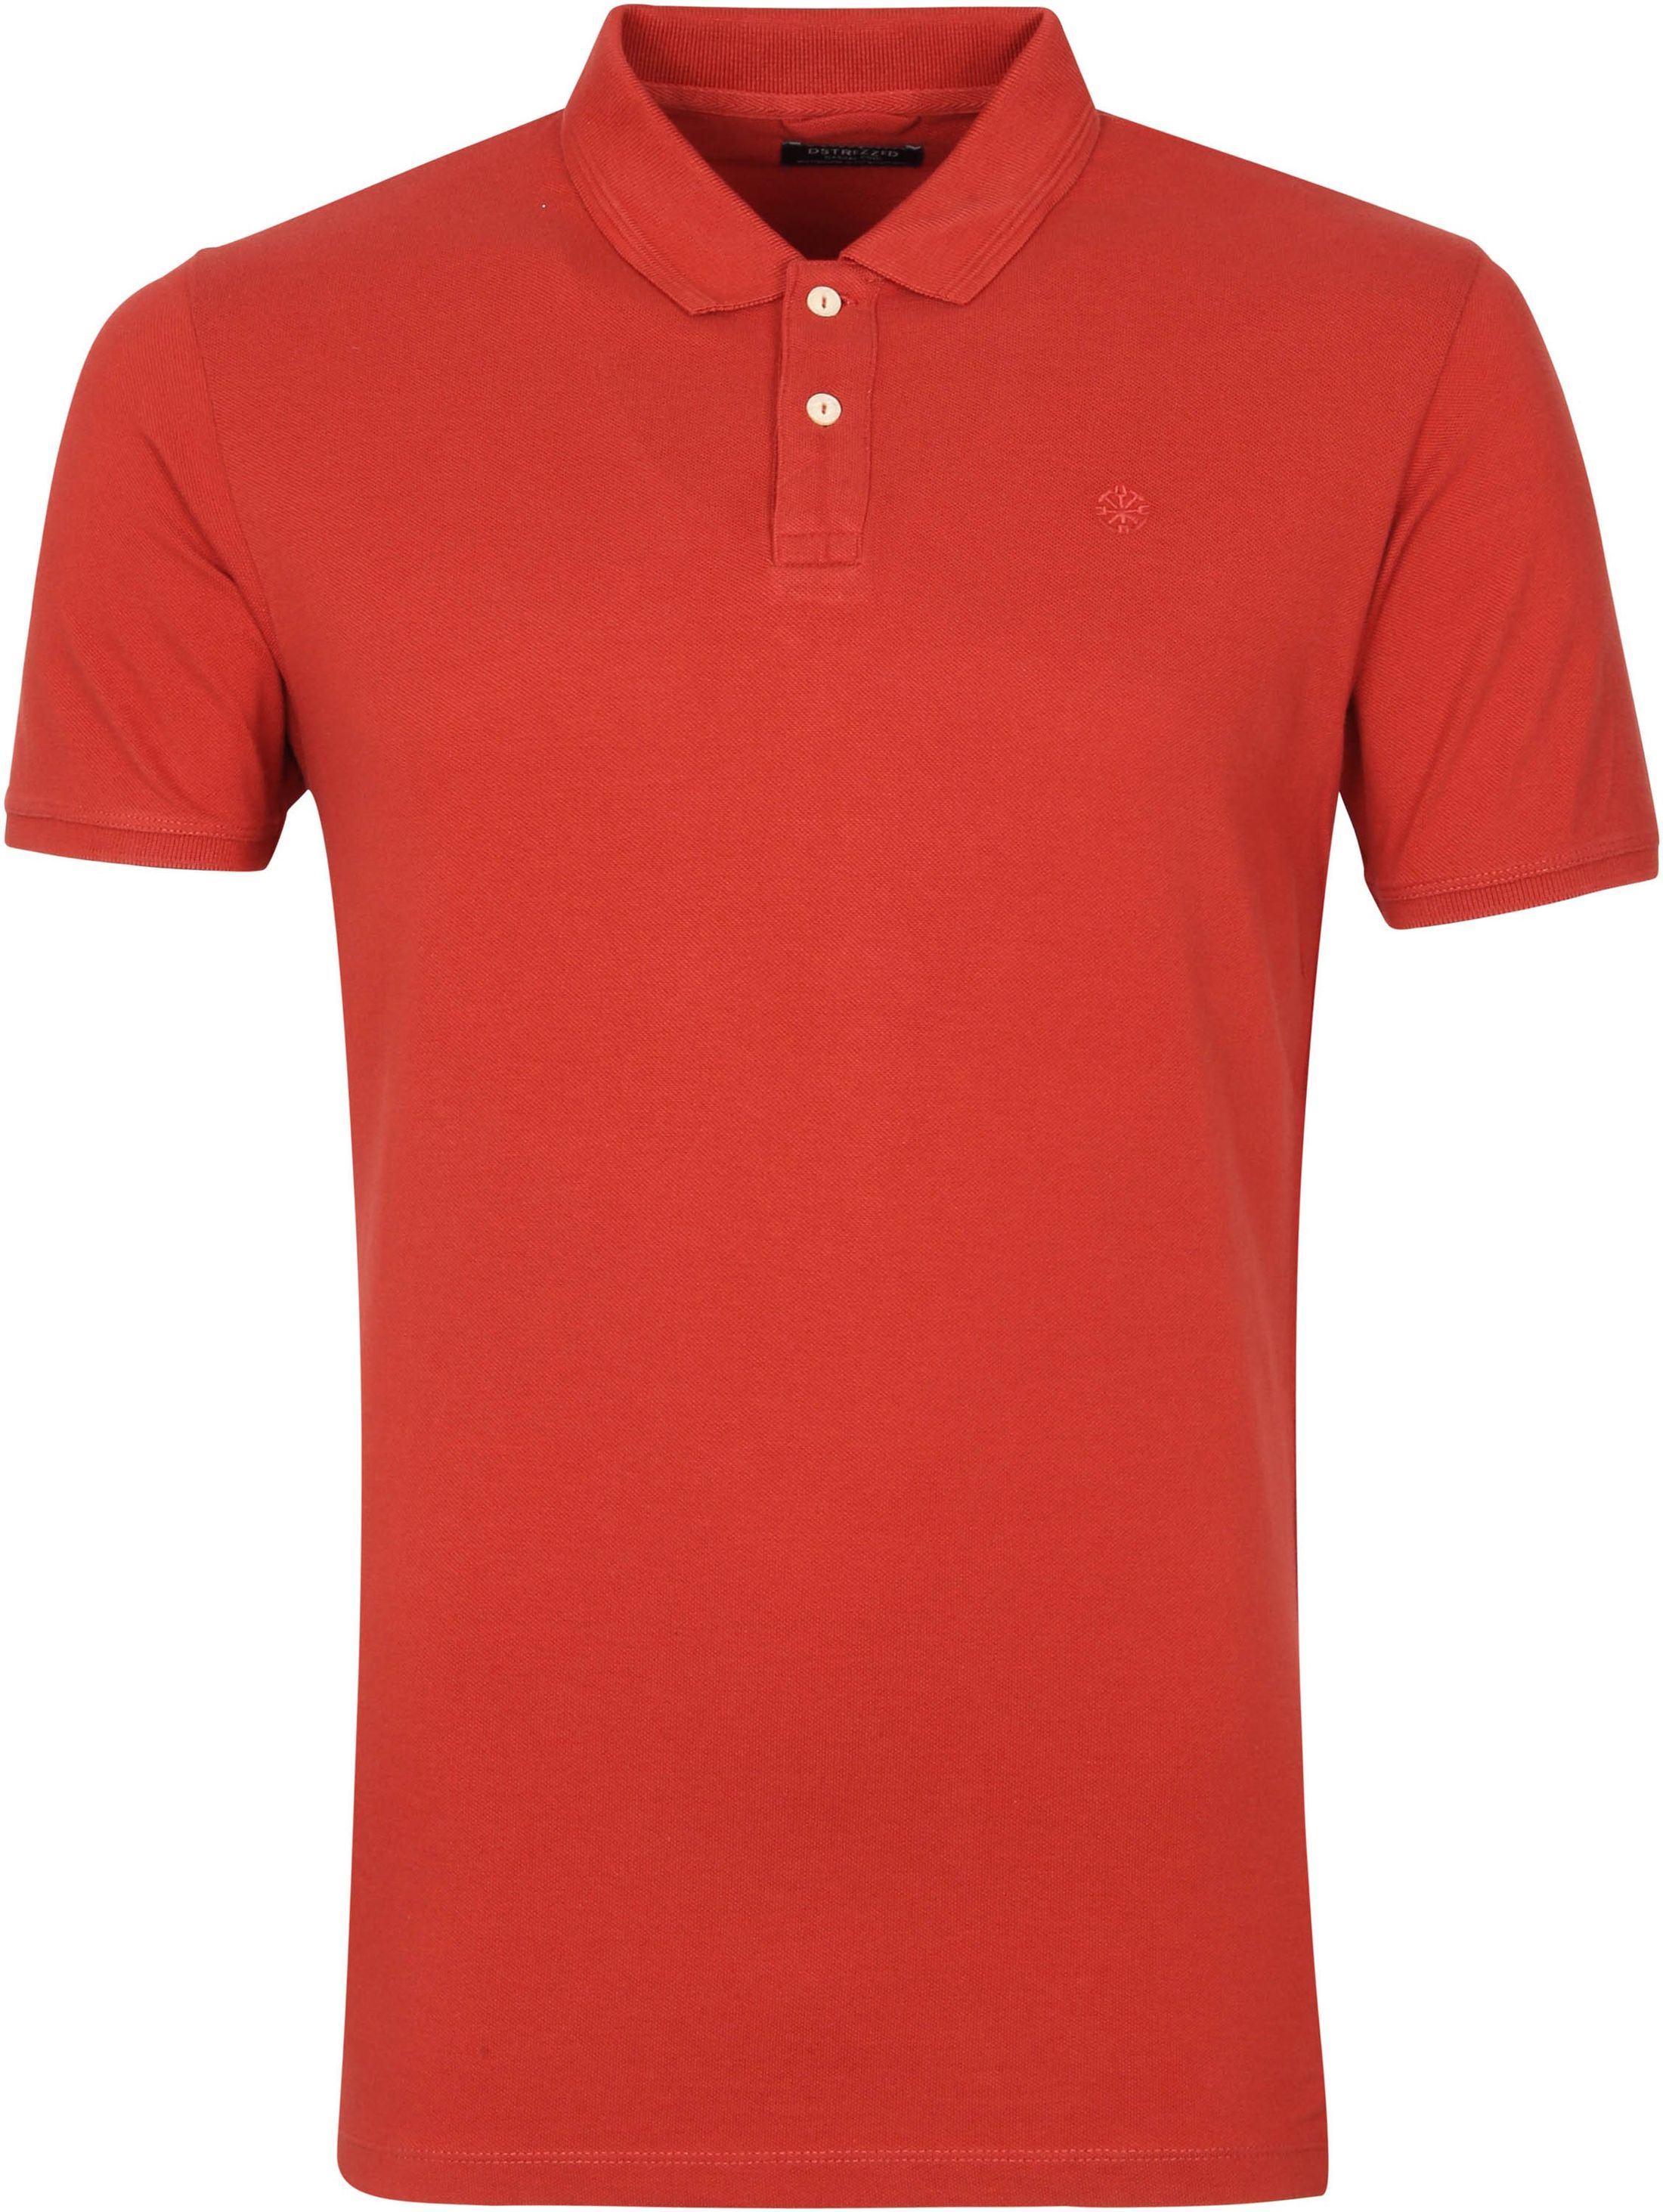 Dstrezzed Polo Shirt Bowie Red size L